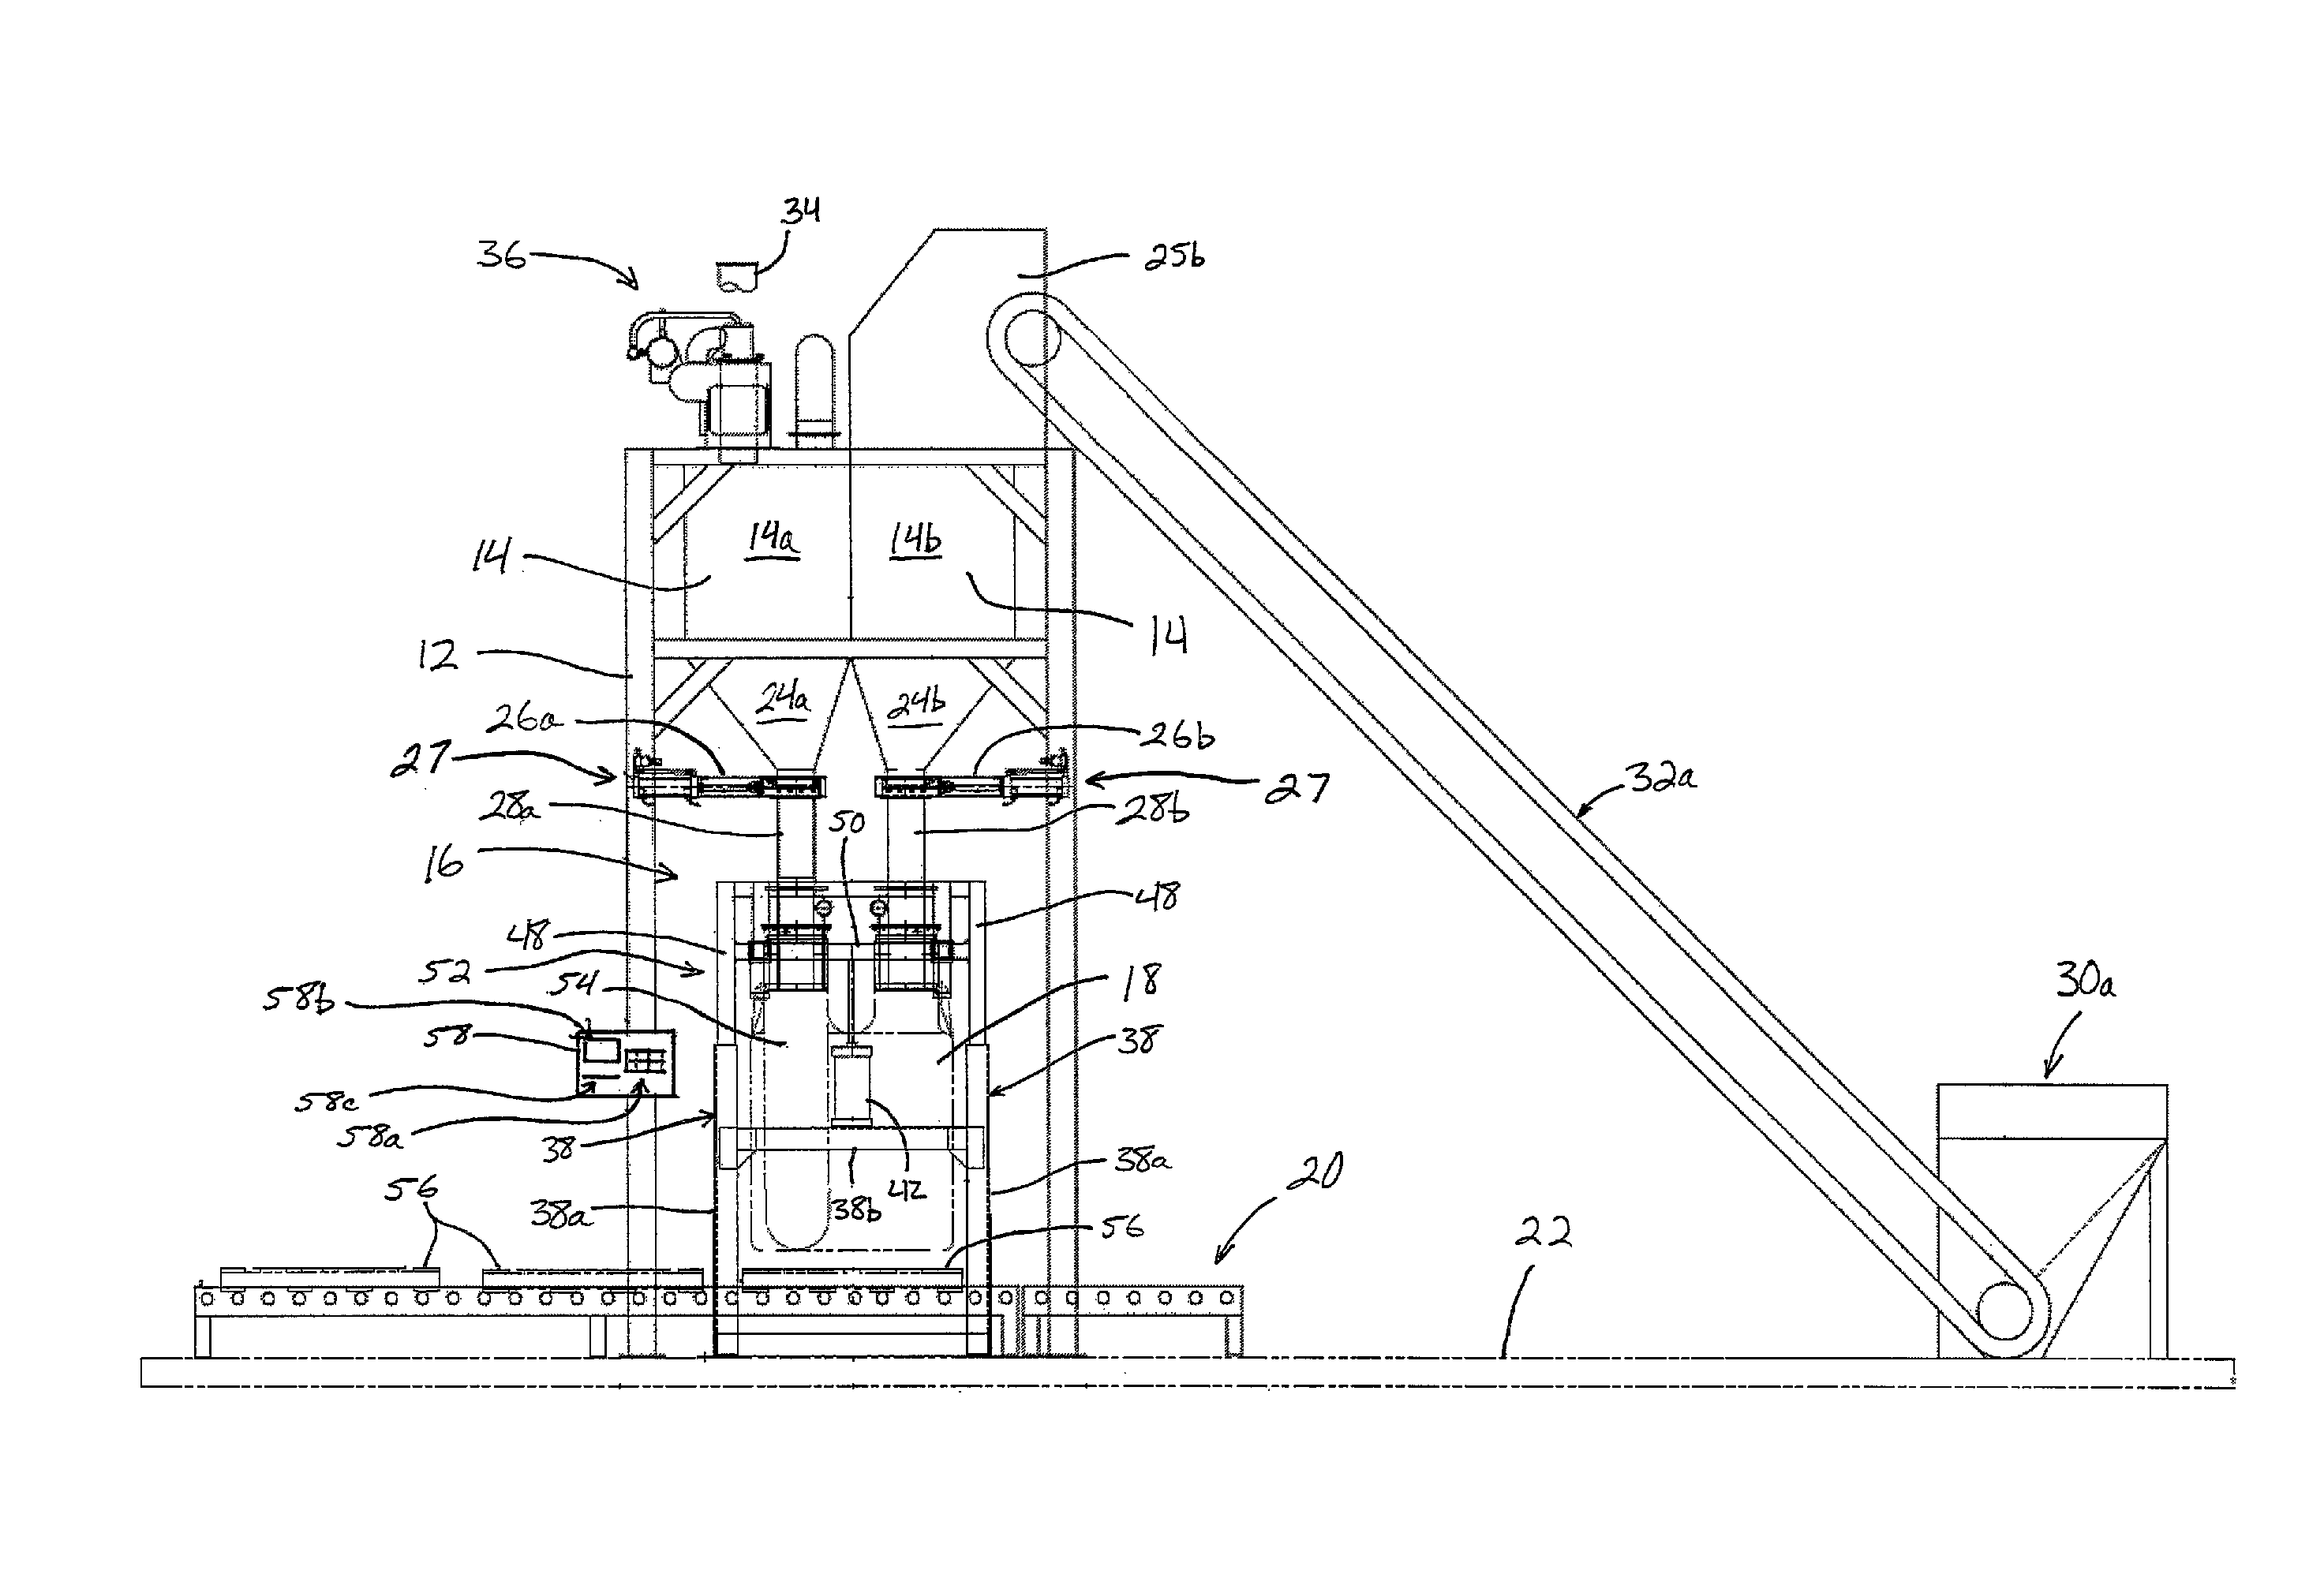 Apparatus and method for filling multi-chamber containers with bulk materials